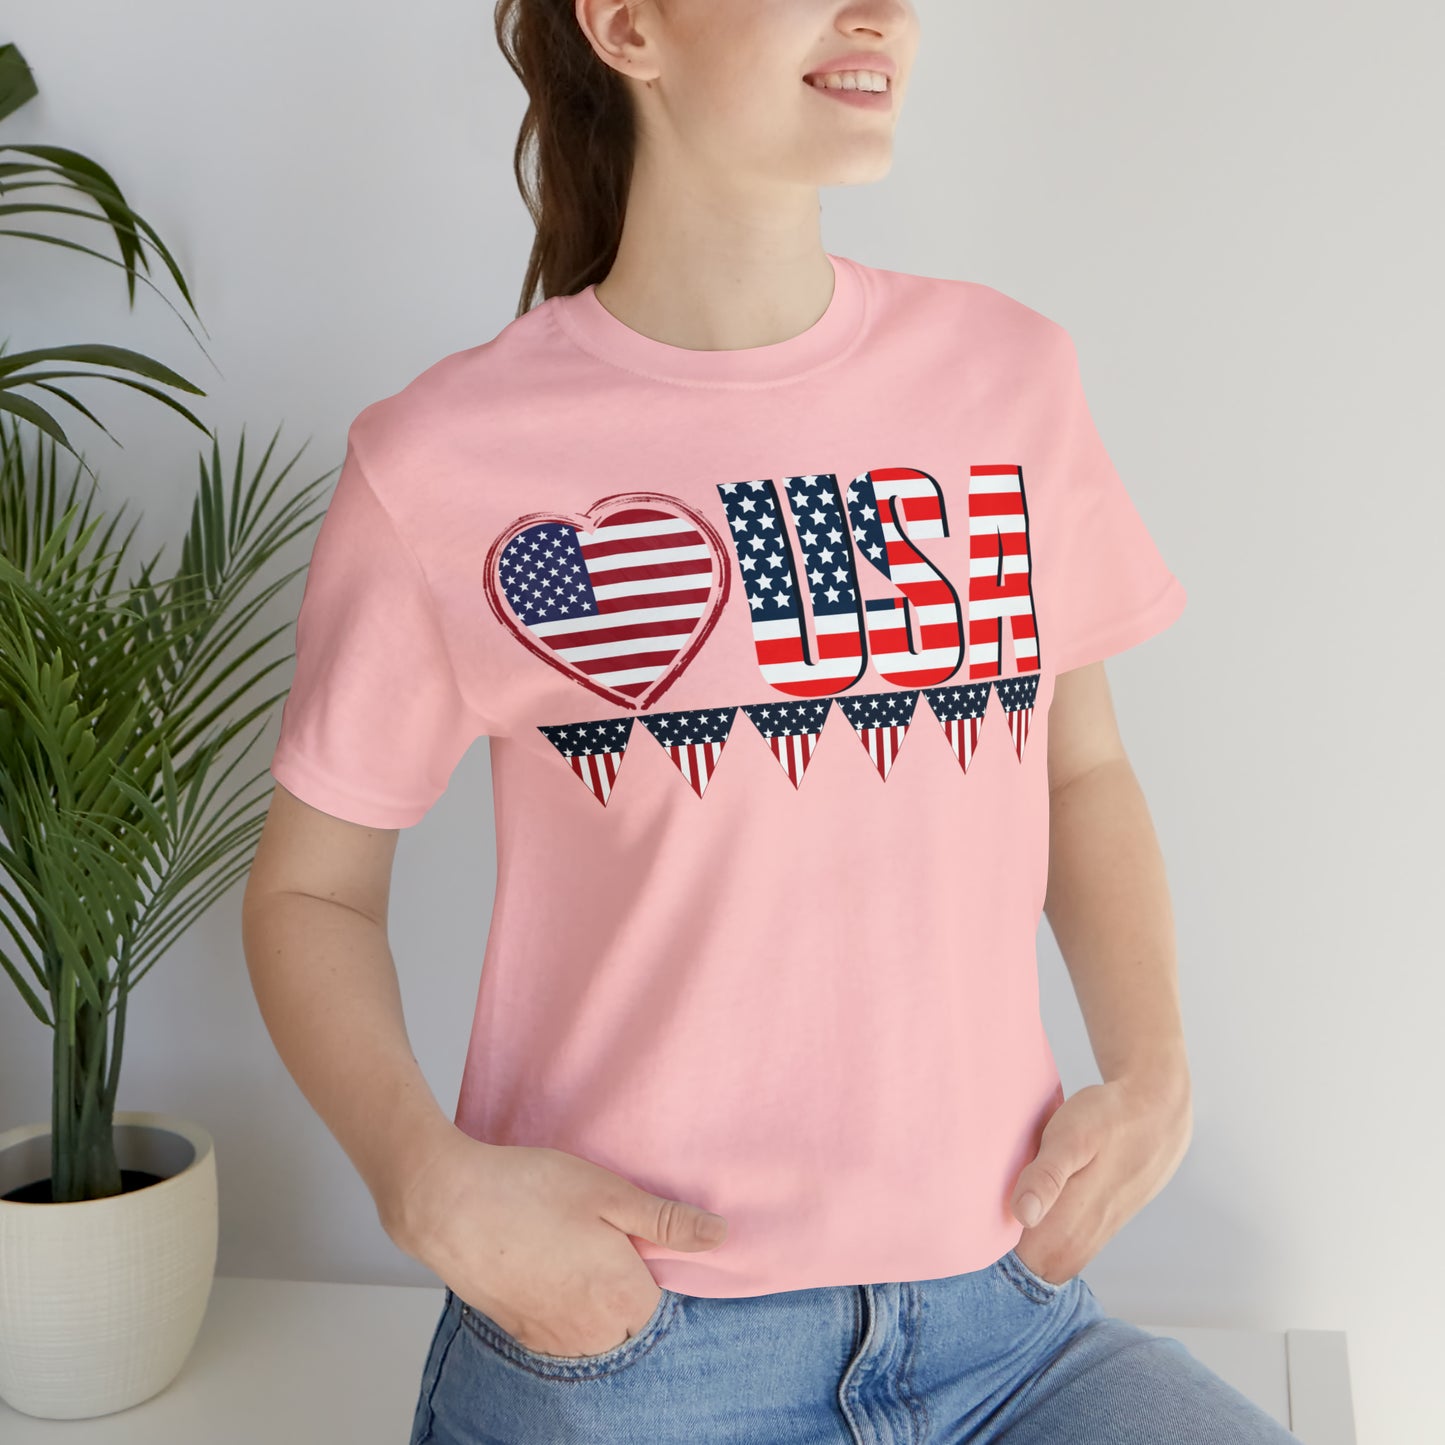 Love USA American flag shirt, Red, white, and blue shirt, 4th of July shirt